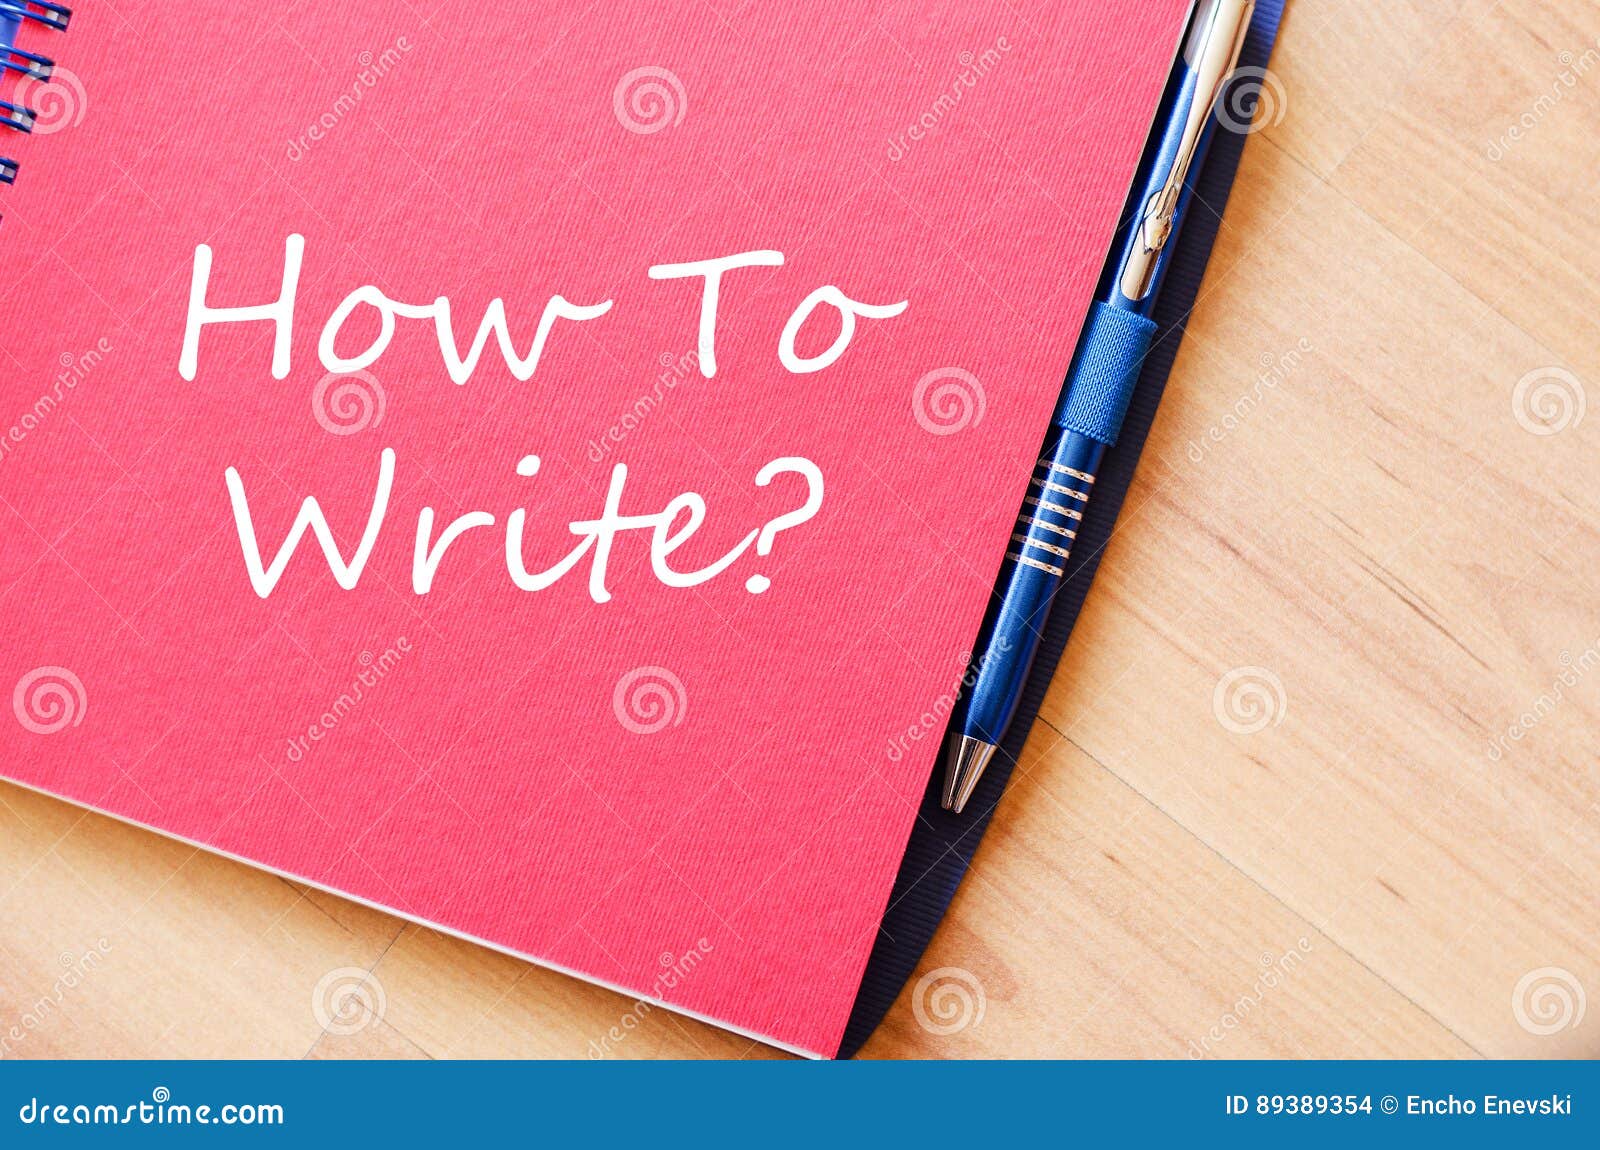 how to write write on notebook